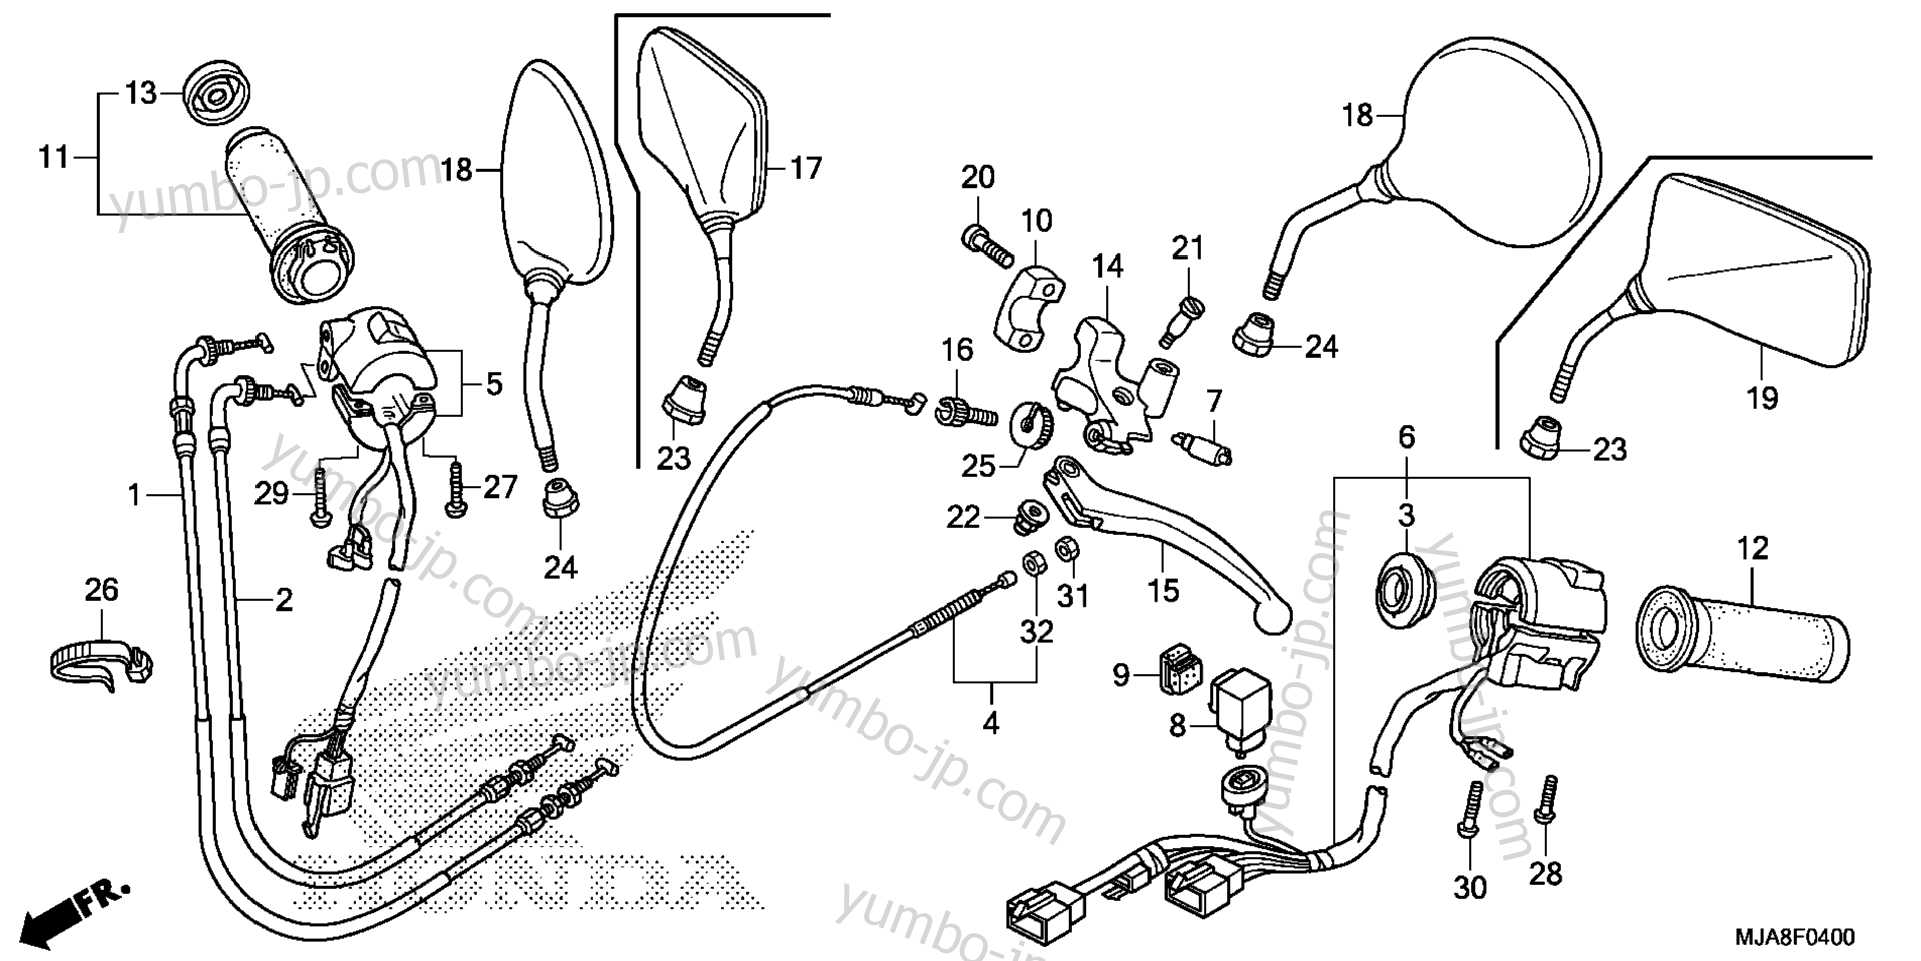 HANDLE LEVER / SWITCH / CABLE for motorcycles HONDA VT750C2F A 2014 year